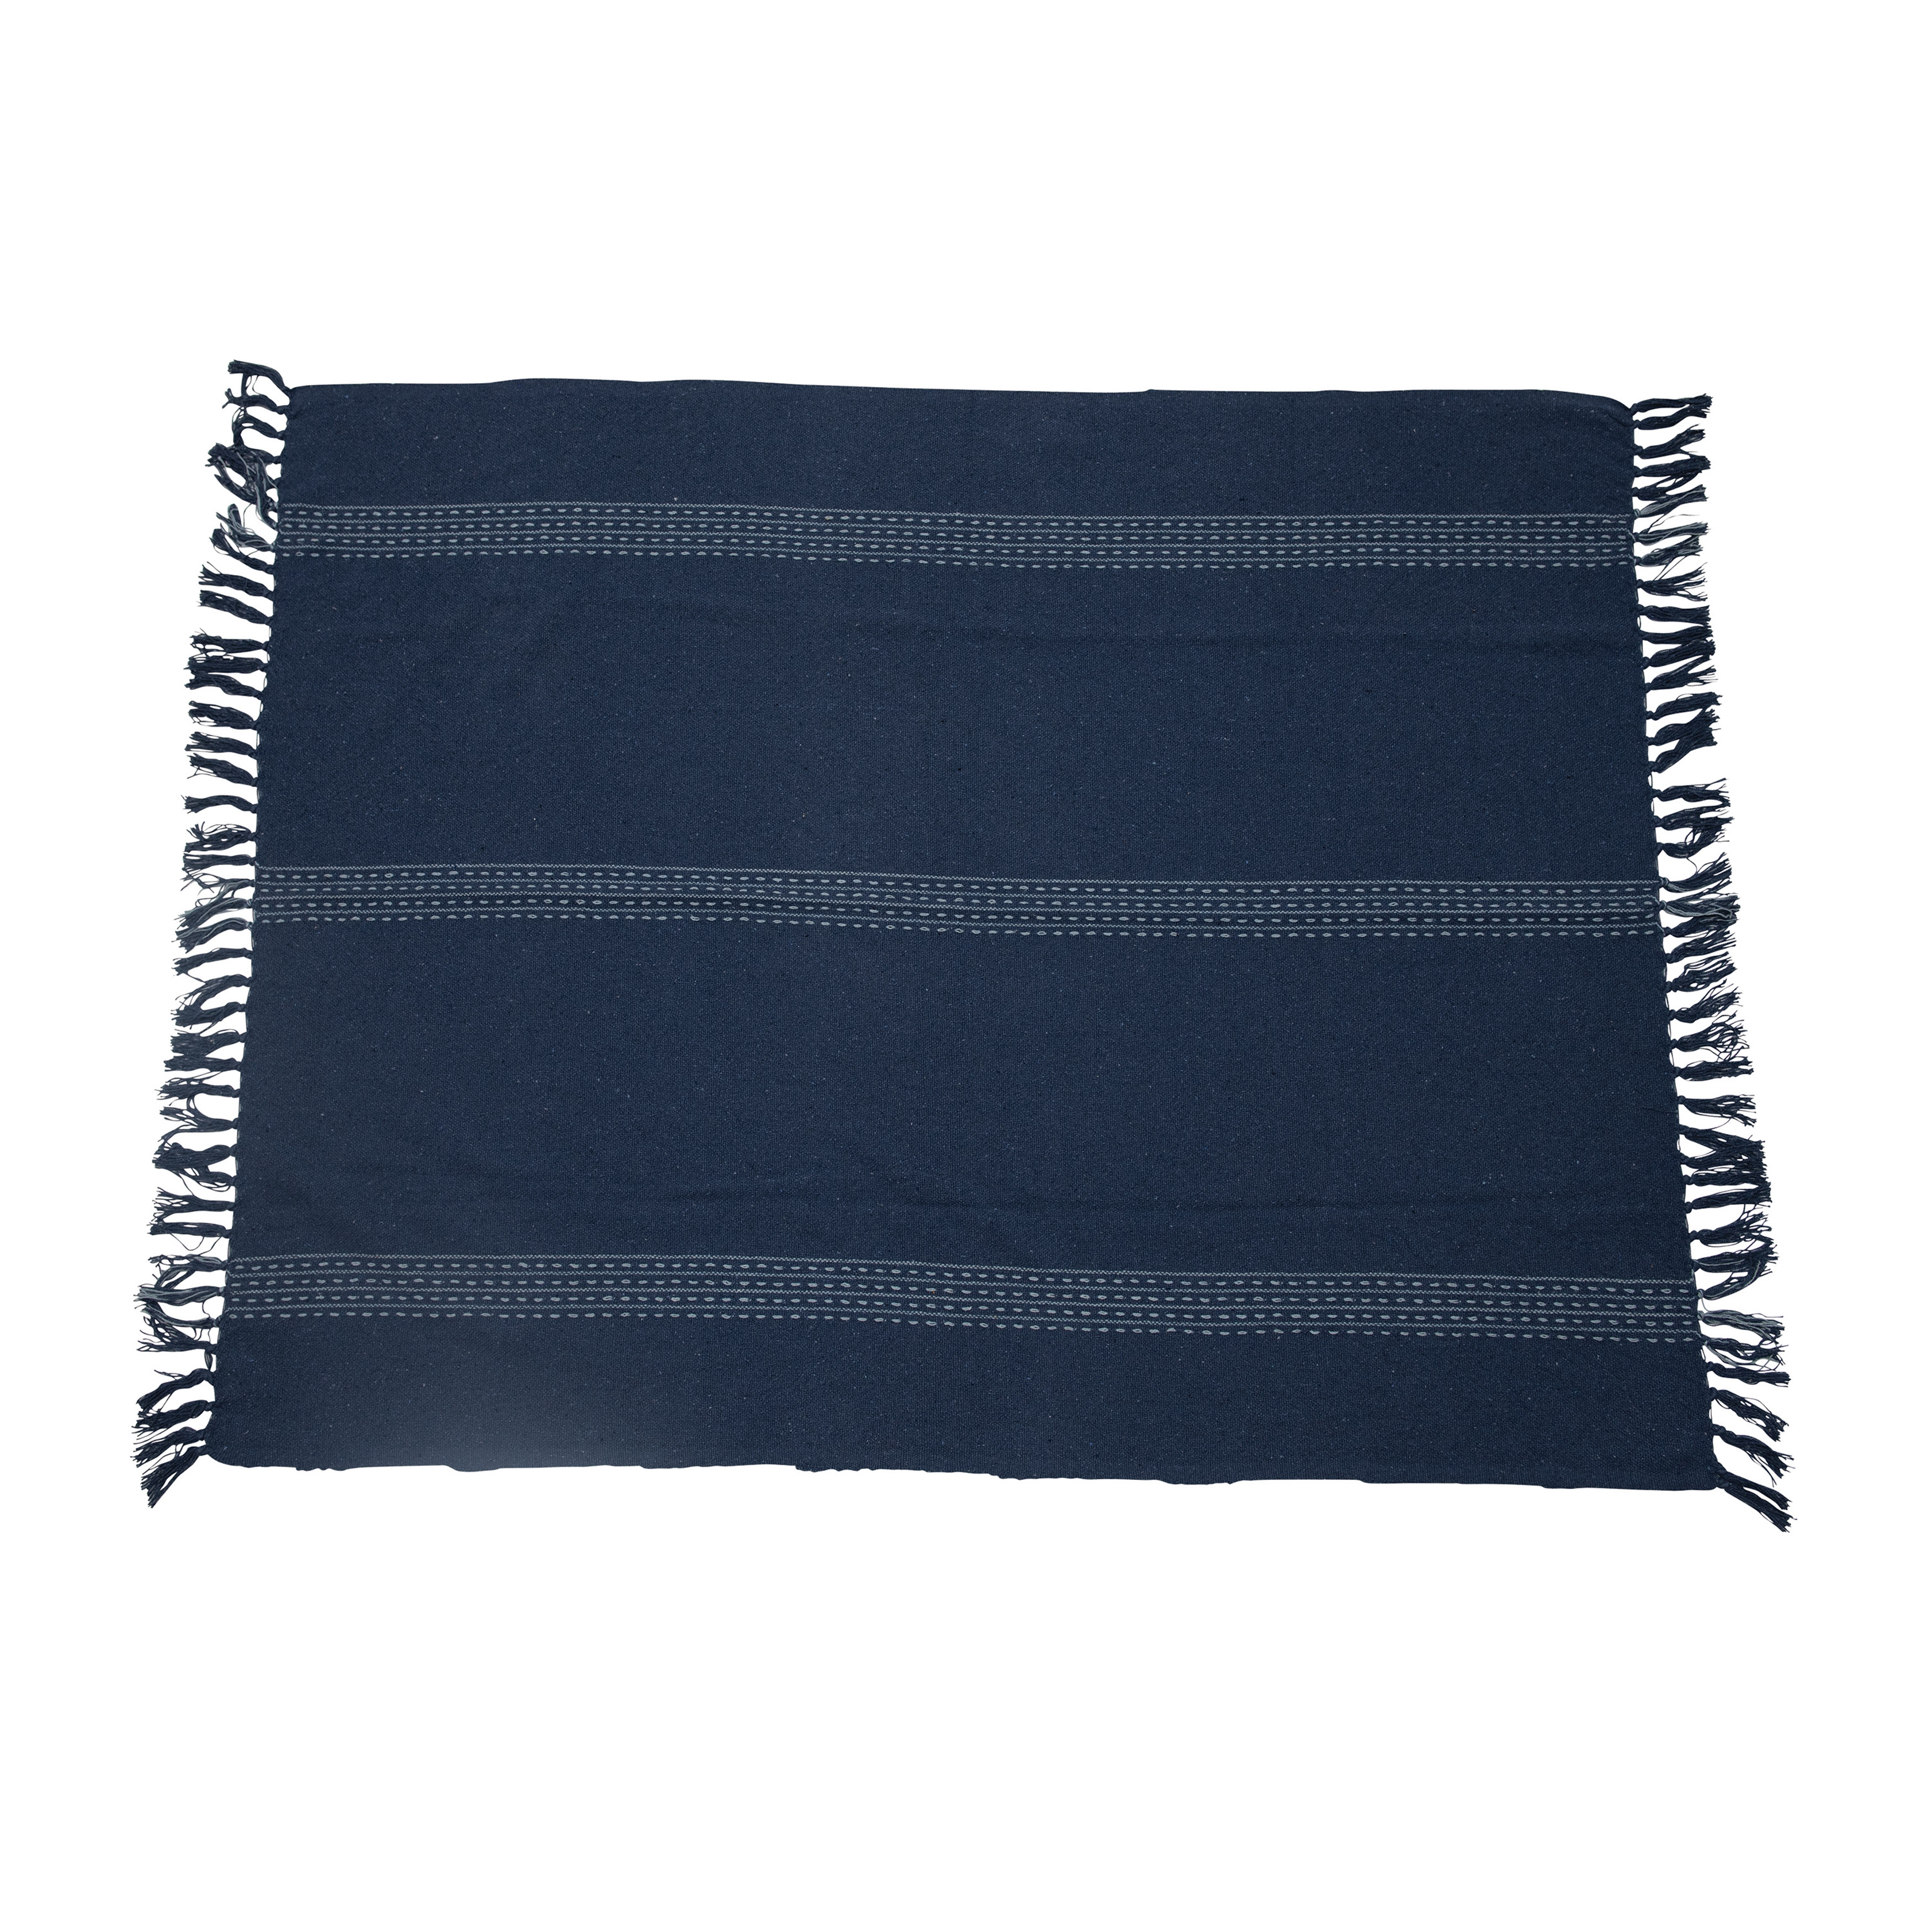 Soft and Cozy Traditional Woven Recycled Cotton Blend Throw Blanket with Stripe Design - Image 0